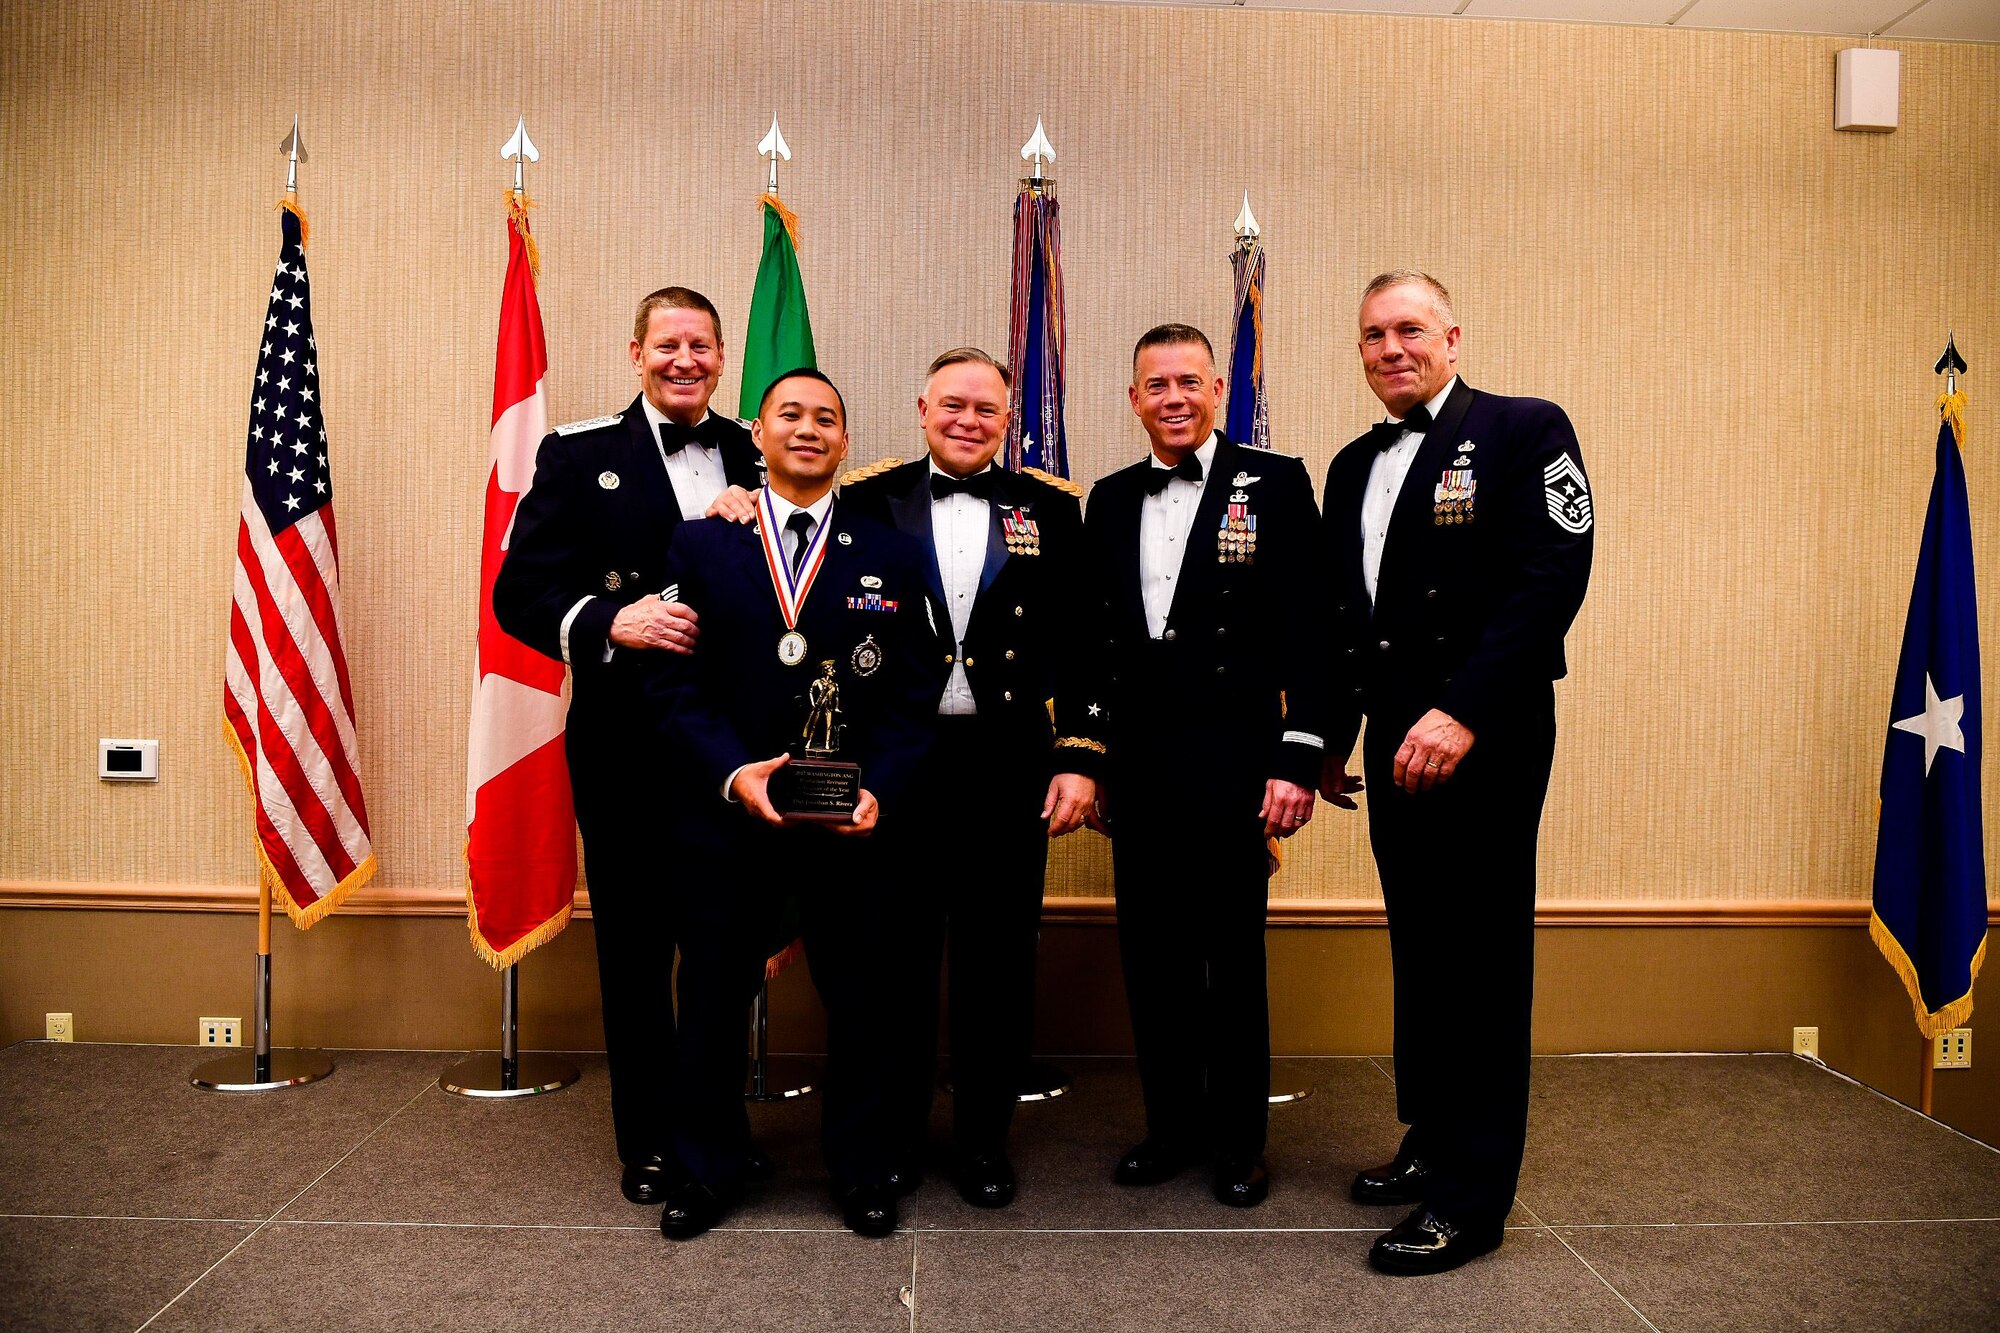 American Lake Conference Center on Joint Base Lewis-McChord, Washington, Jan. 27, 2018.  Rivera was awarded the trophy for his outstanding contributions to the Washington Air National Guard over the last year.  Pictured from left to right are: Gen. Robin Rand, Air Force Global Strike Command and Air Forces Strategic-Air, U.S. Strategic Command commander, Rivera, Maj. Gen. Bret Daugherty, Adjutant General of the Washington National Guard, Montgomery, Brig. Gen. Jeremy Horn, commander of the Washington Air National Guard, River, and Chief Master Sgt. Max Tidwell, Washington Air National Guard command chief. (U.S. Air National Guard photo by Tech. Sgt. Timothy Chacon)